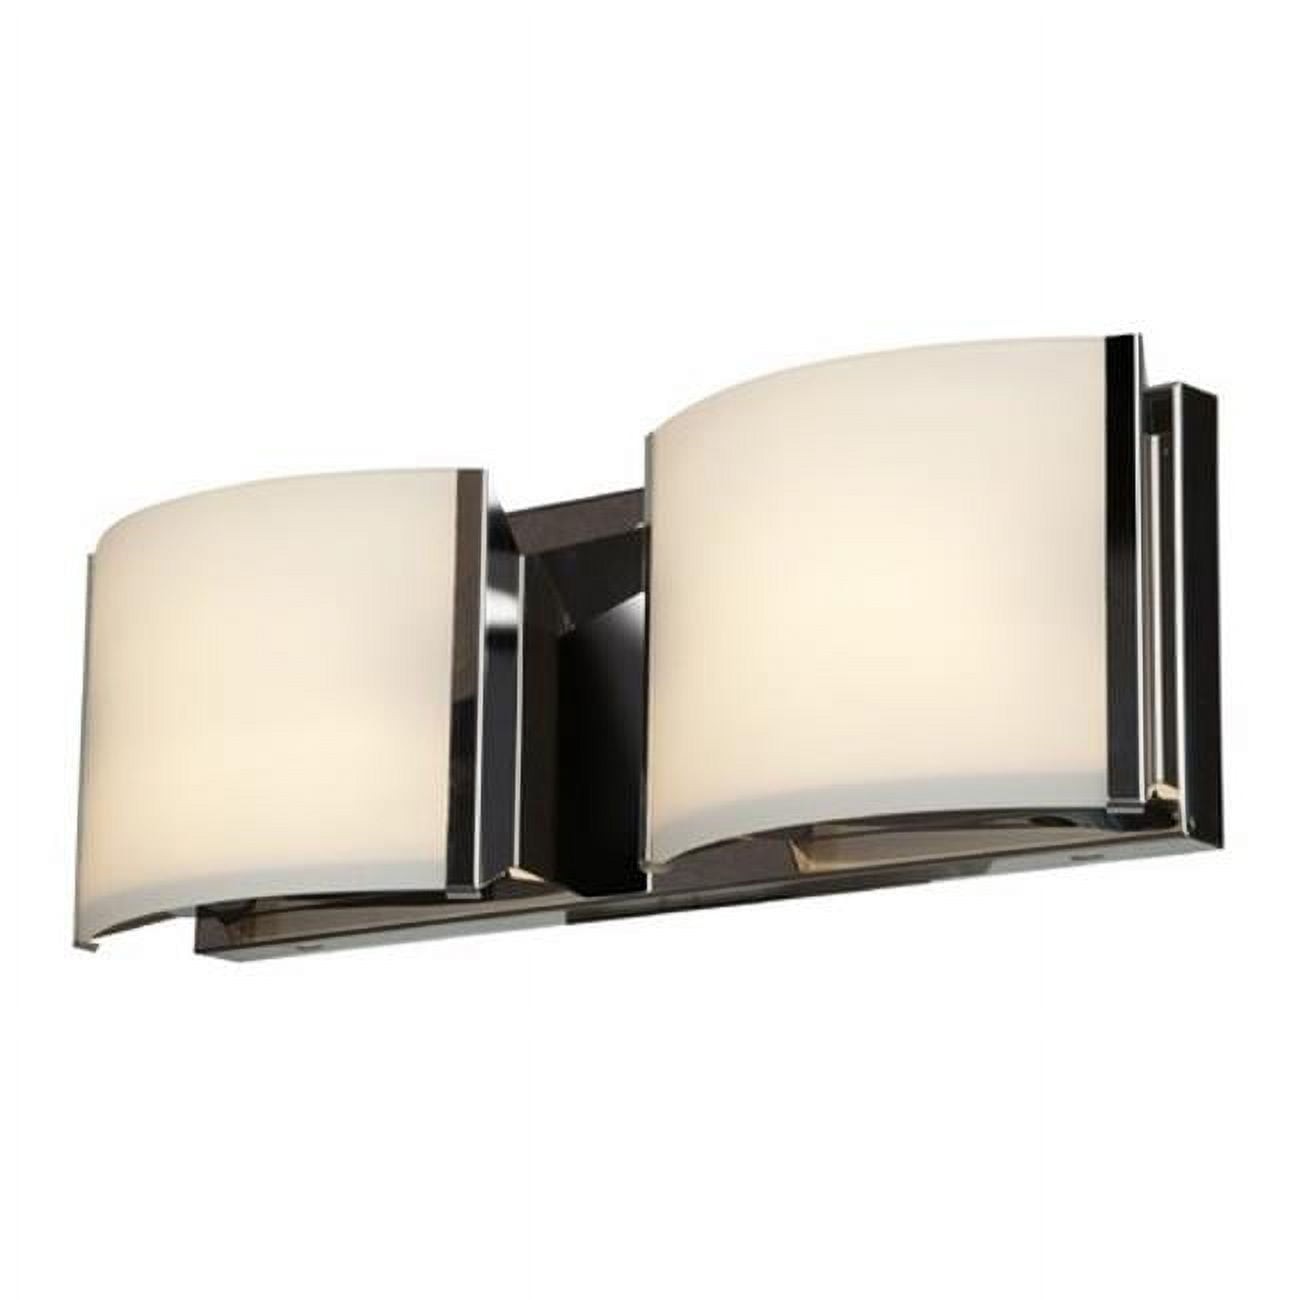 Picture of Access Lighting 62292-BS-OPL 16 in. Nitro 2 2 Light Brushed Steel Vanity Light Wall Light